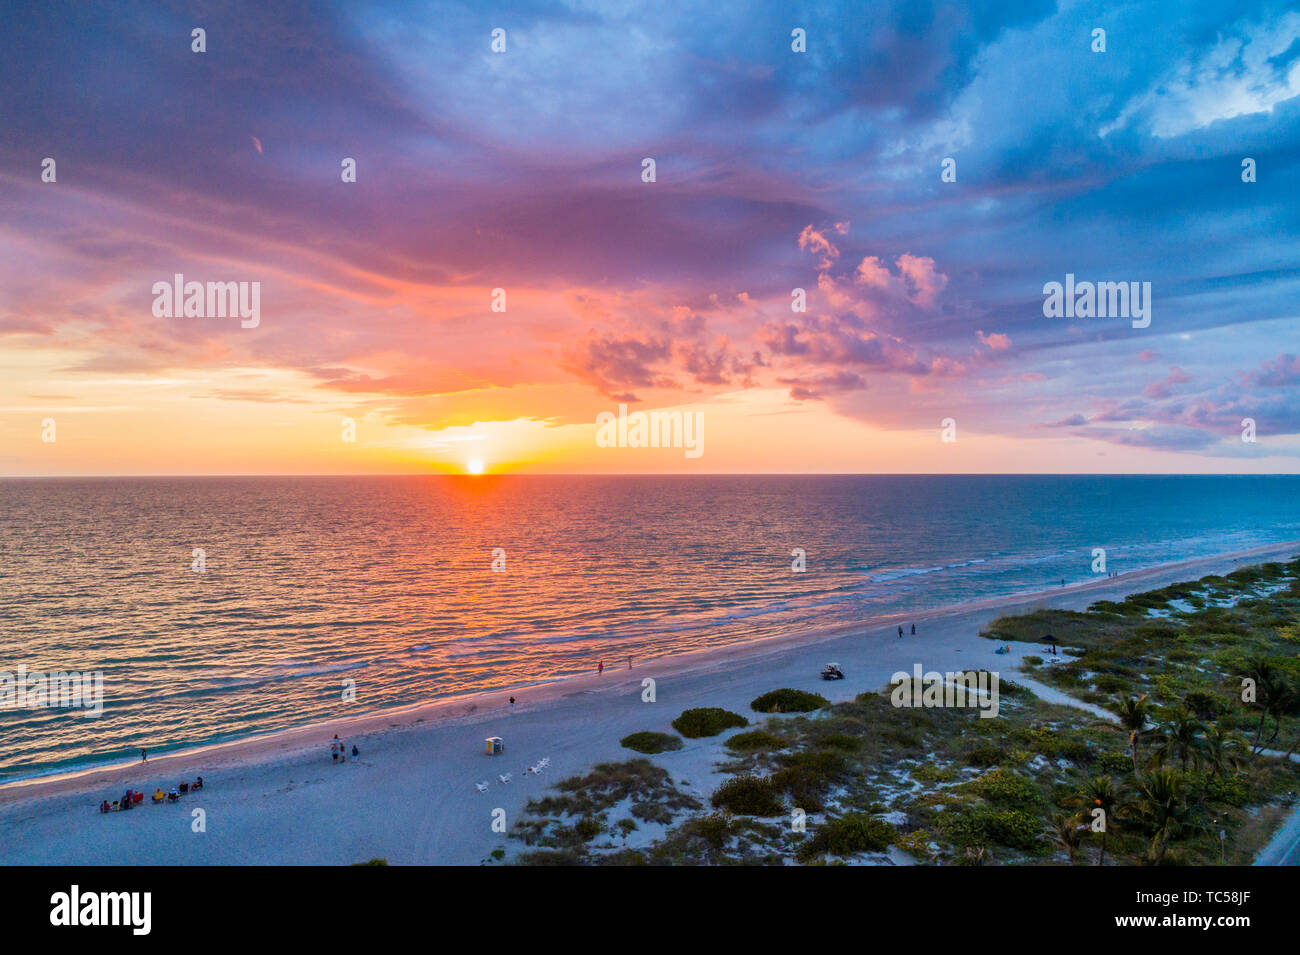 Captiva Island Florida,Gulf of Mexico beach sunset clouds water sky,aerial overhead view,FL190508d24 Stock Photo